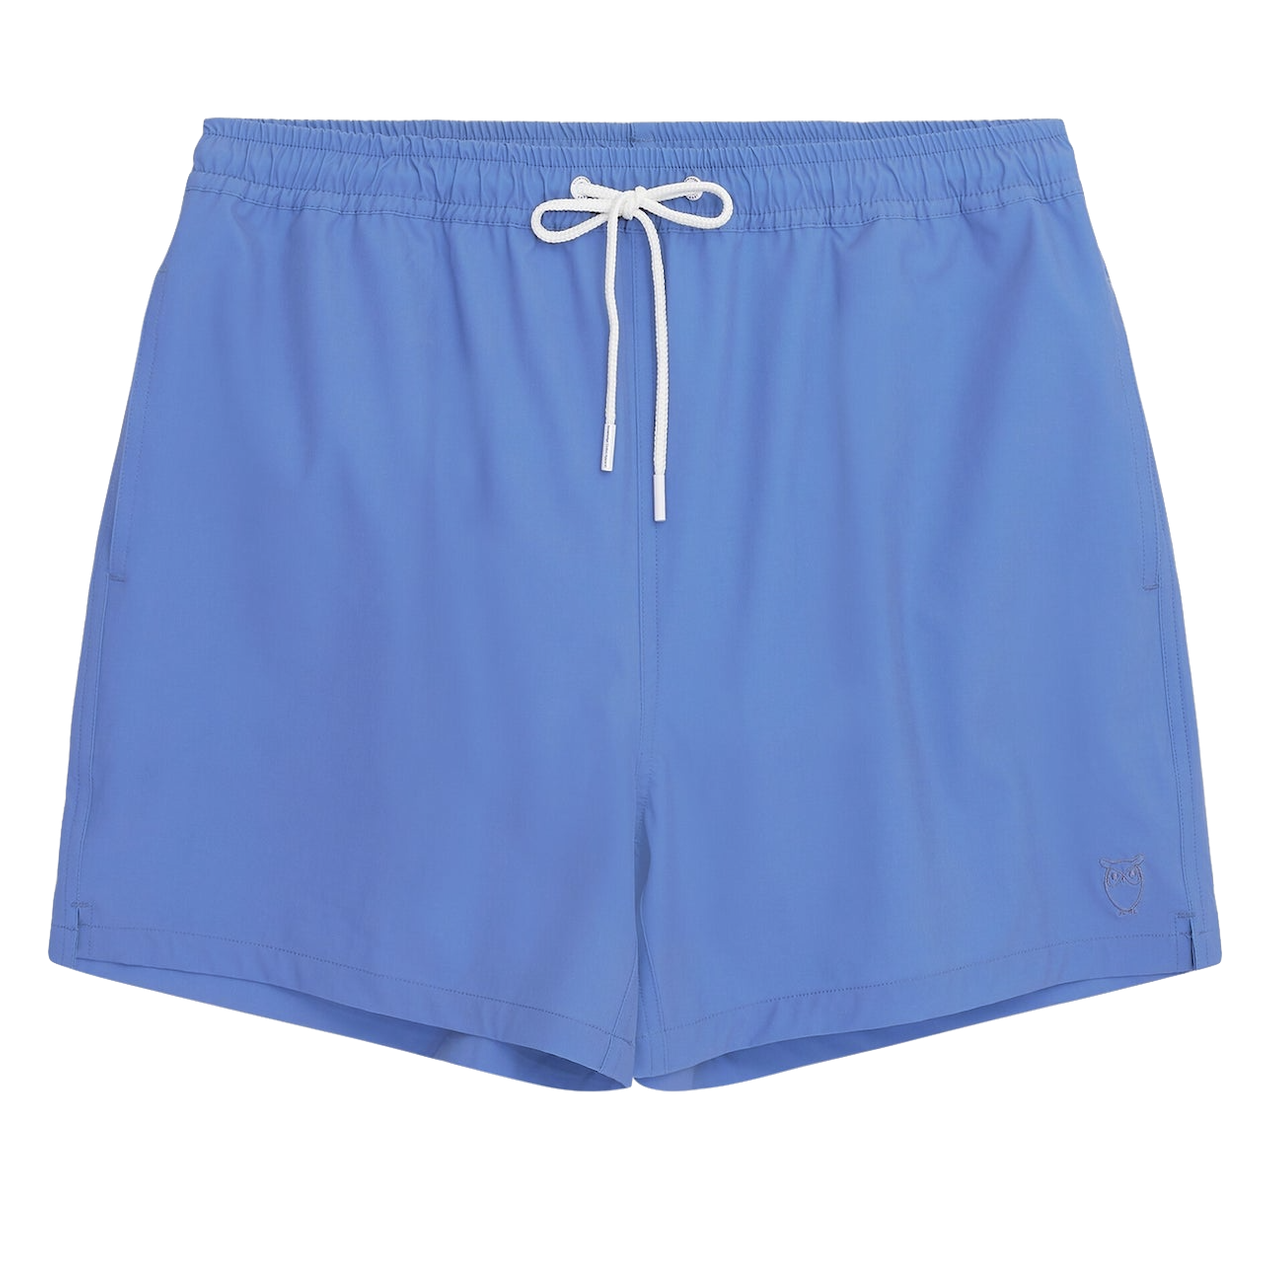 KnowledgeCotton Apparel KnowledgeCotton, Bay Swimshorts, moonlight blue, S